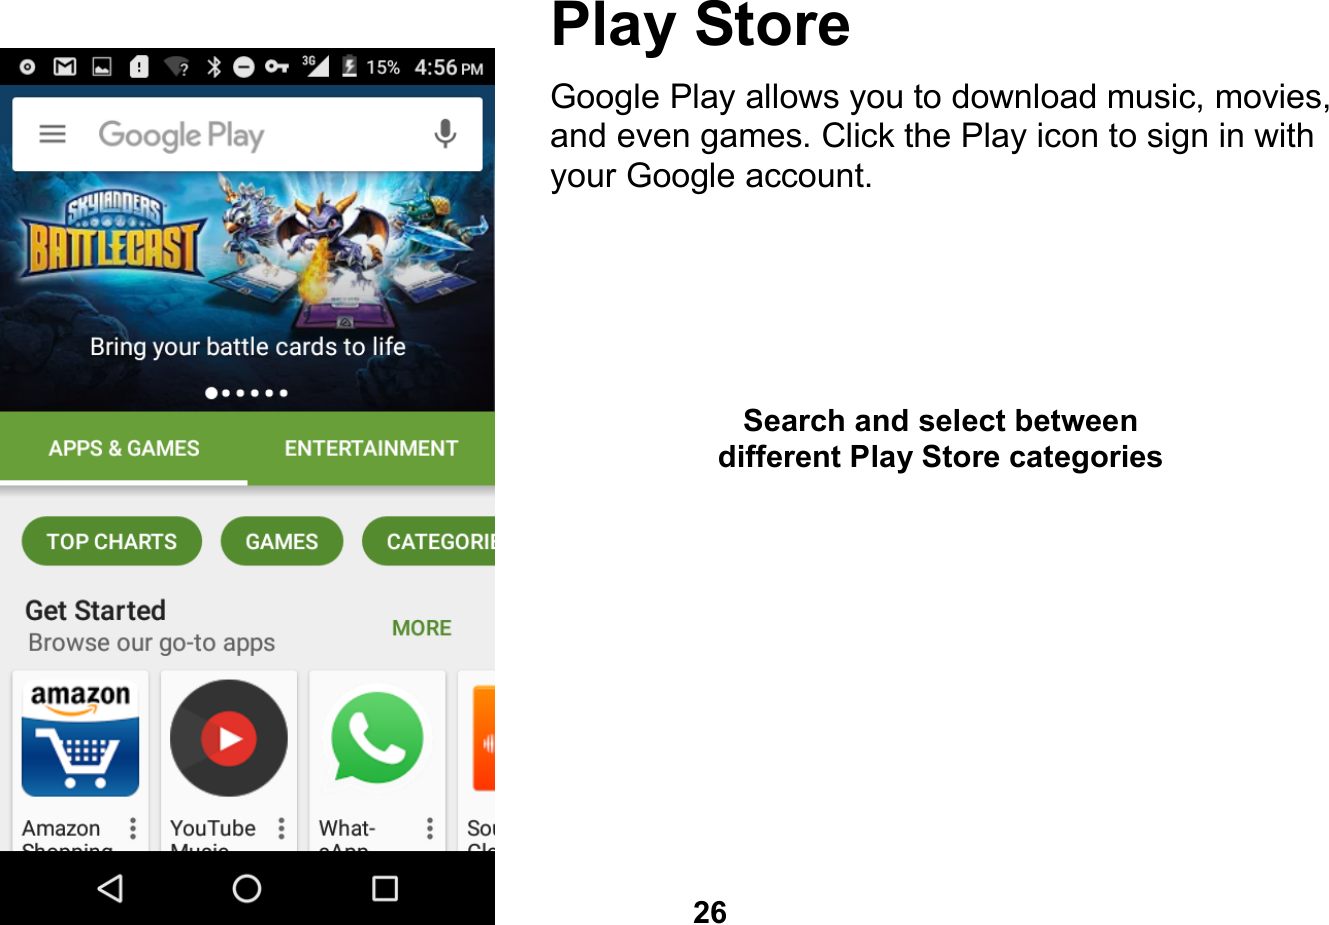   26  Play Store Google Play allows you to download music, movies, and even games. Click the Play icon to sign in with your Google account.          Search and select between different Play Store categories 